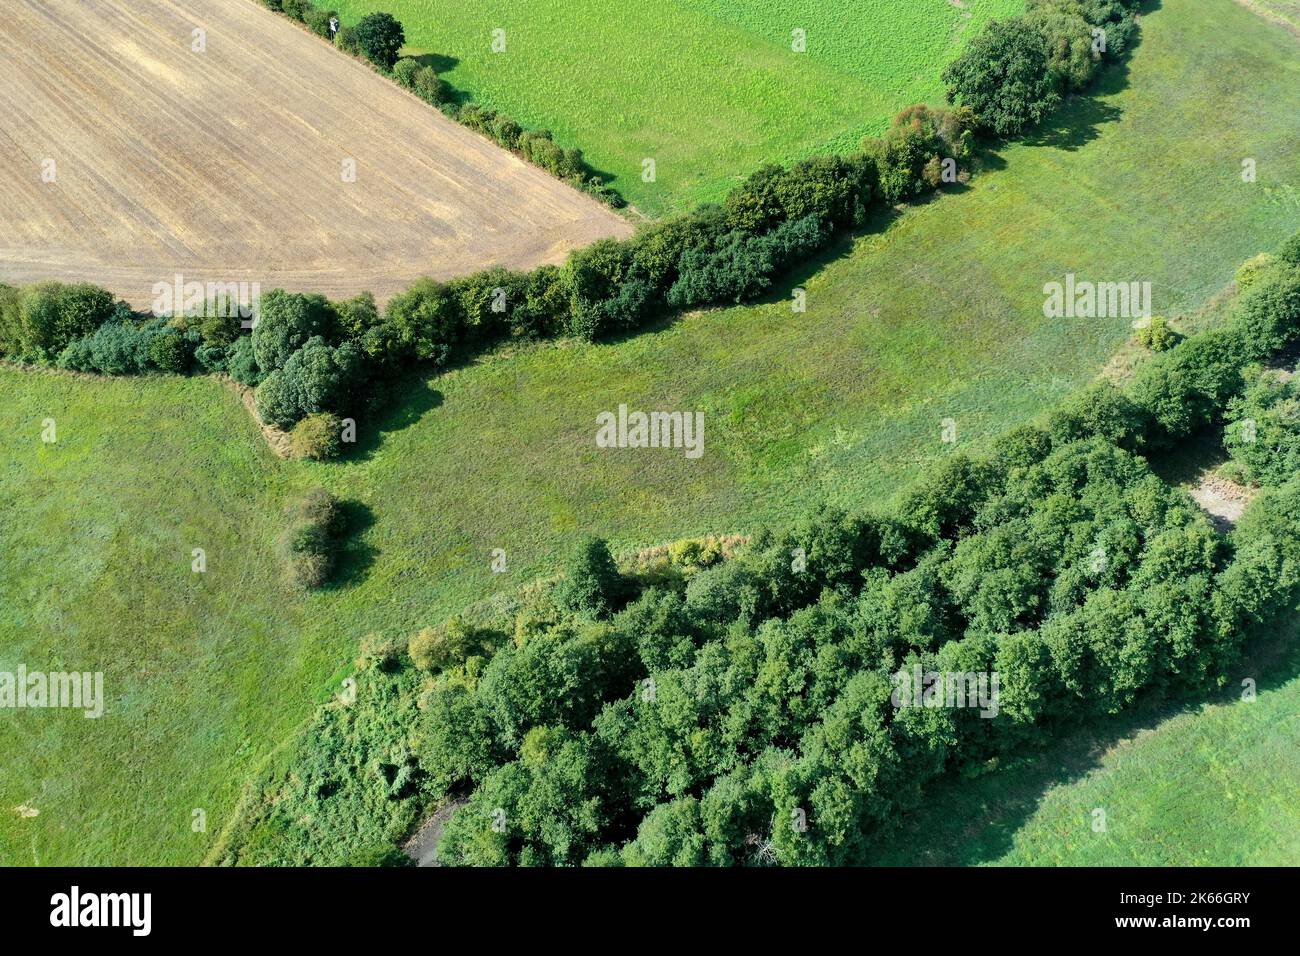 conservation project stone pit meadows at the forest Luebeck, grassland in early autumn after dry summer, aerial view, Germany, Schleswig-Holstein, Stock Photo